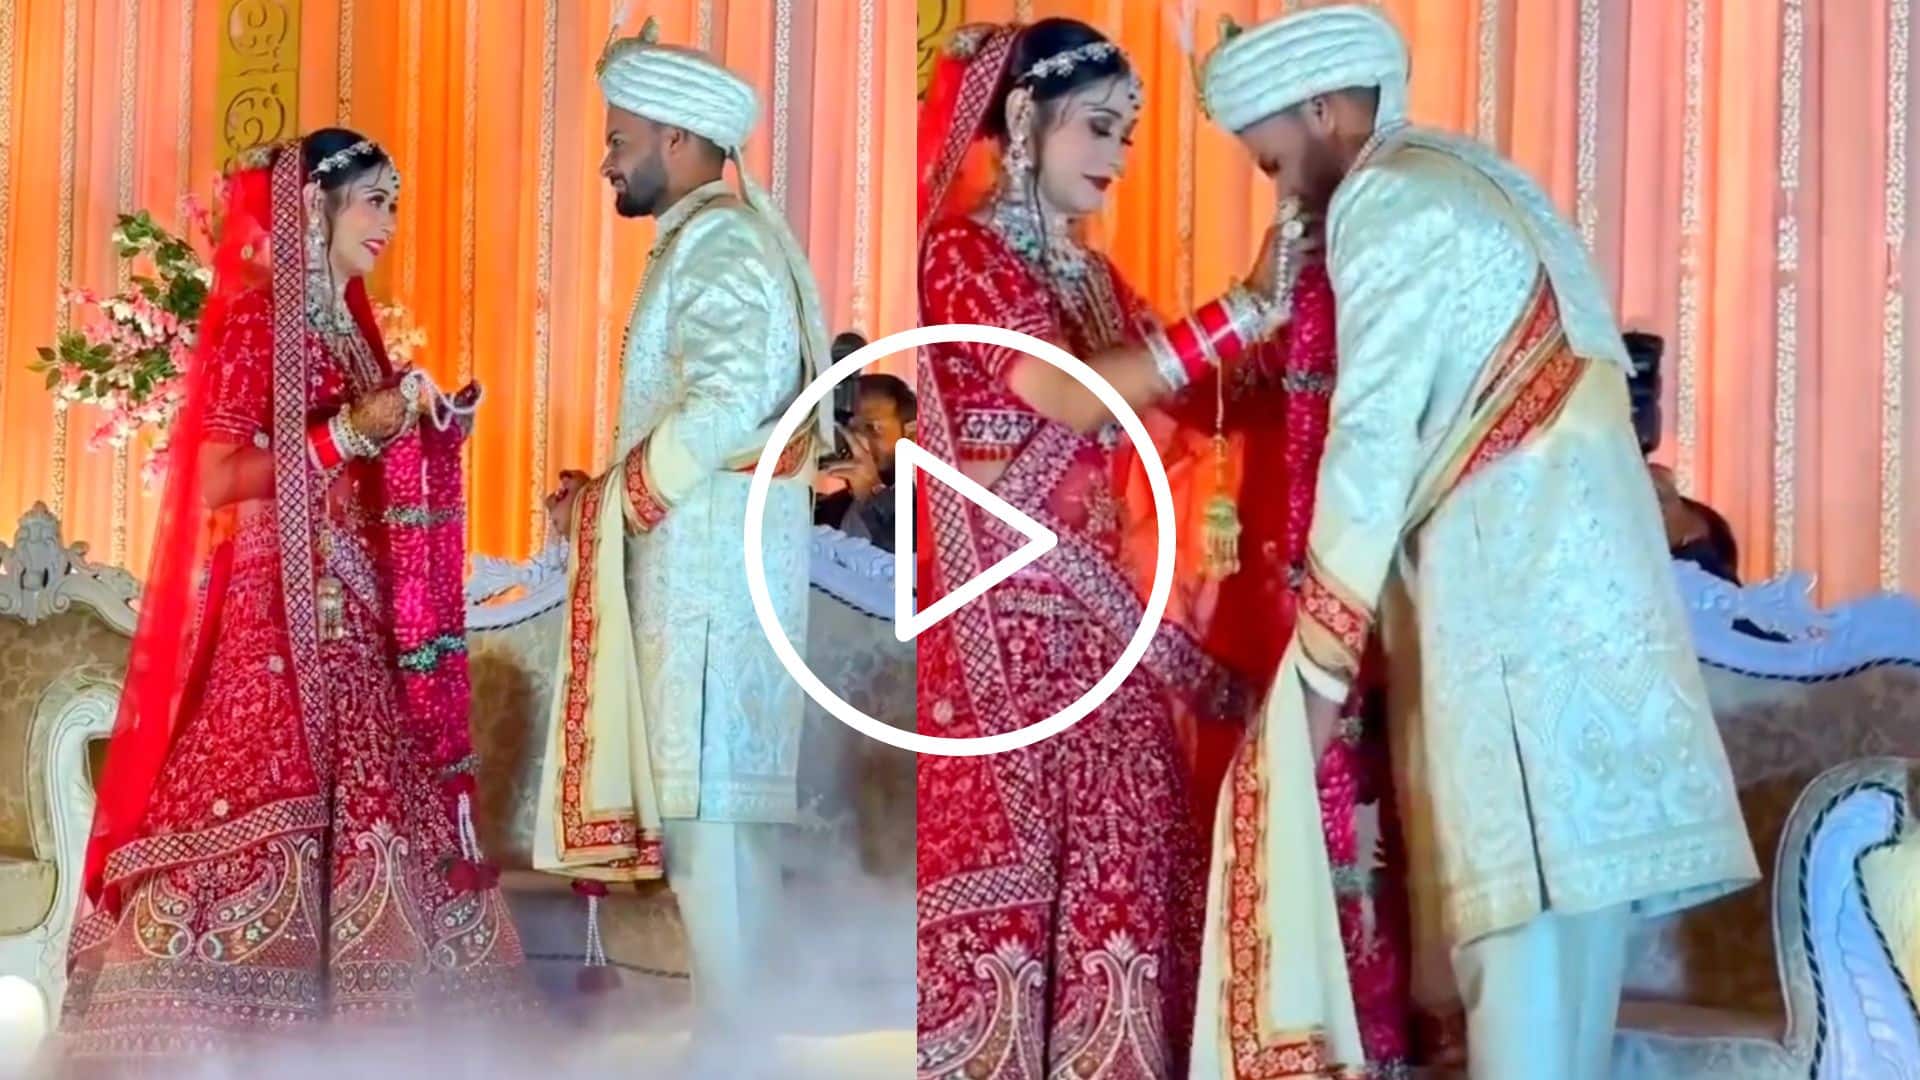 [Watch] India Pacer Mukesh Kumar Gets Married With The Love Of His Life, Divya Singh